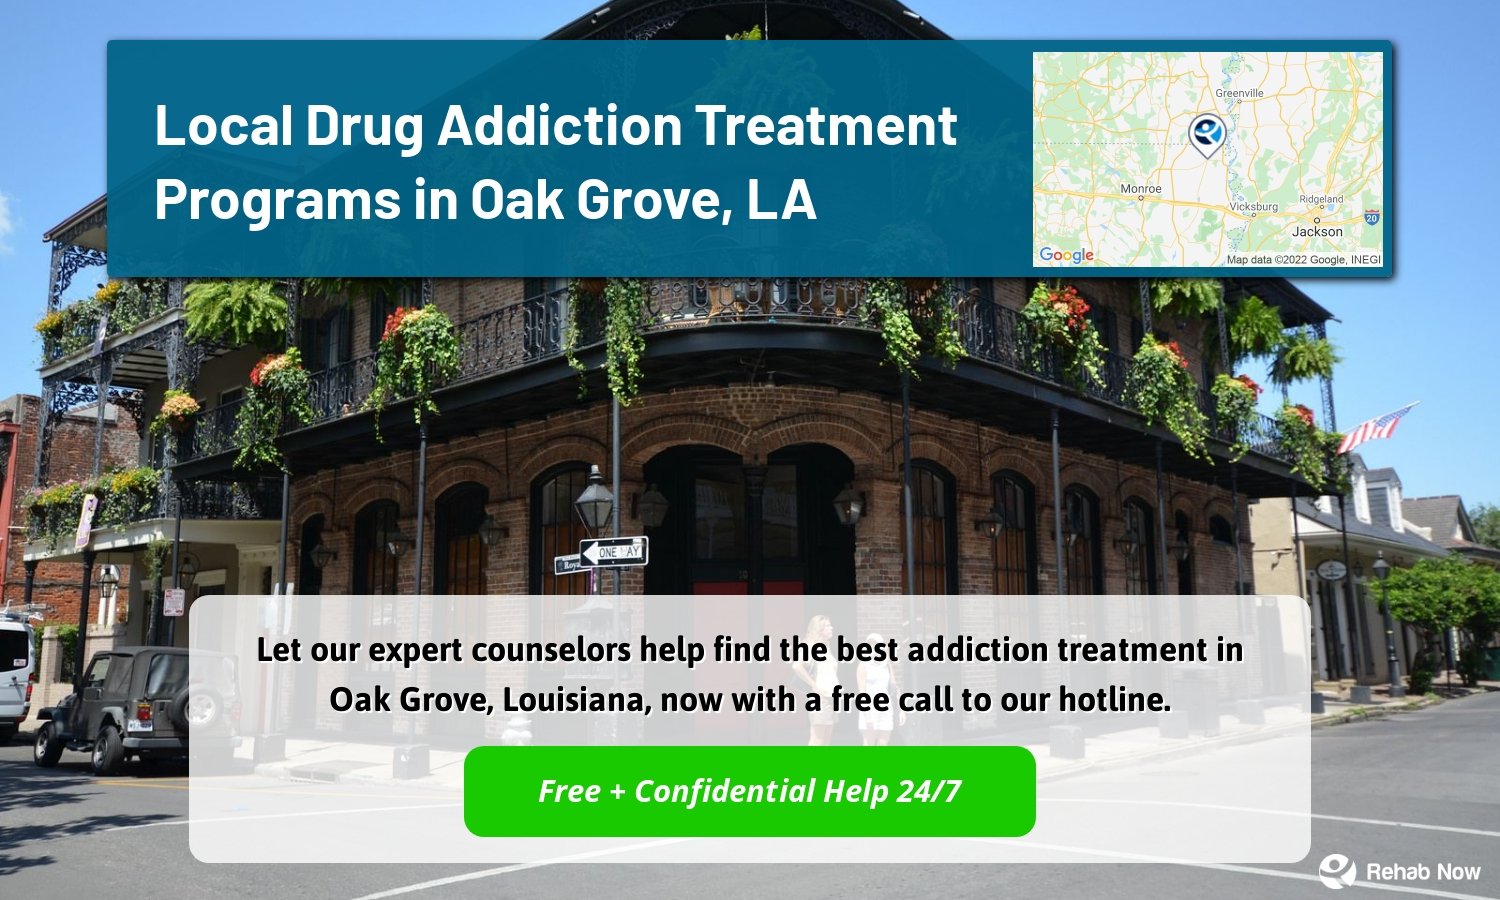 Let our expert counselors help find the best addiction treatment in Oak Grove, Louisiana, now with a free call to our hotline.